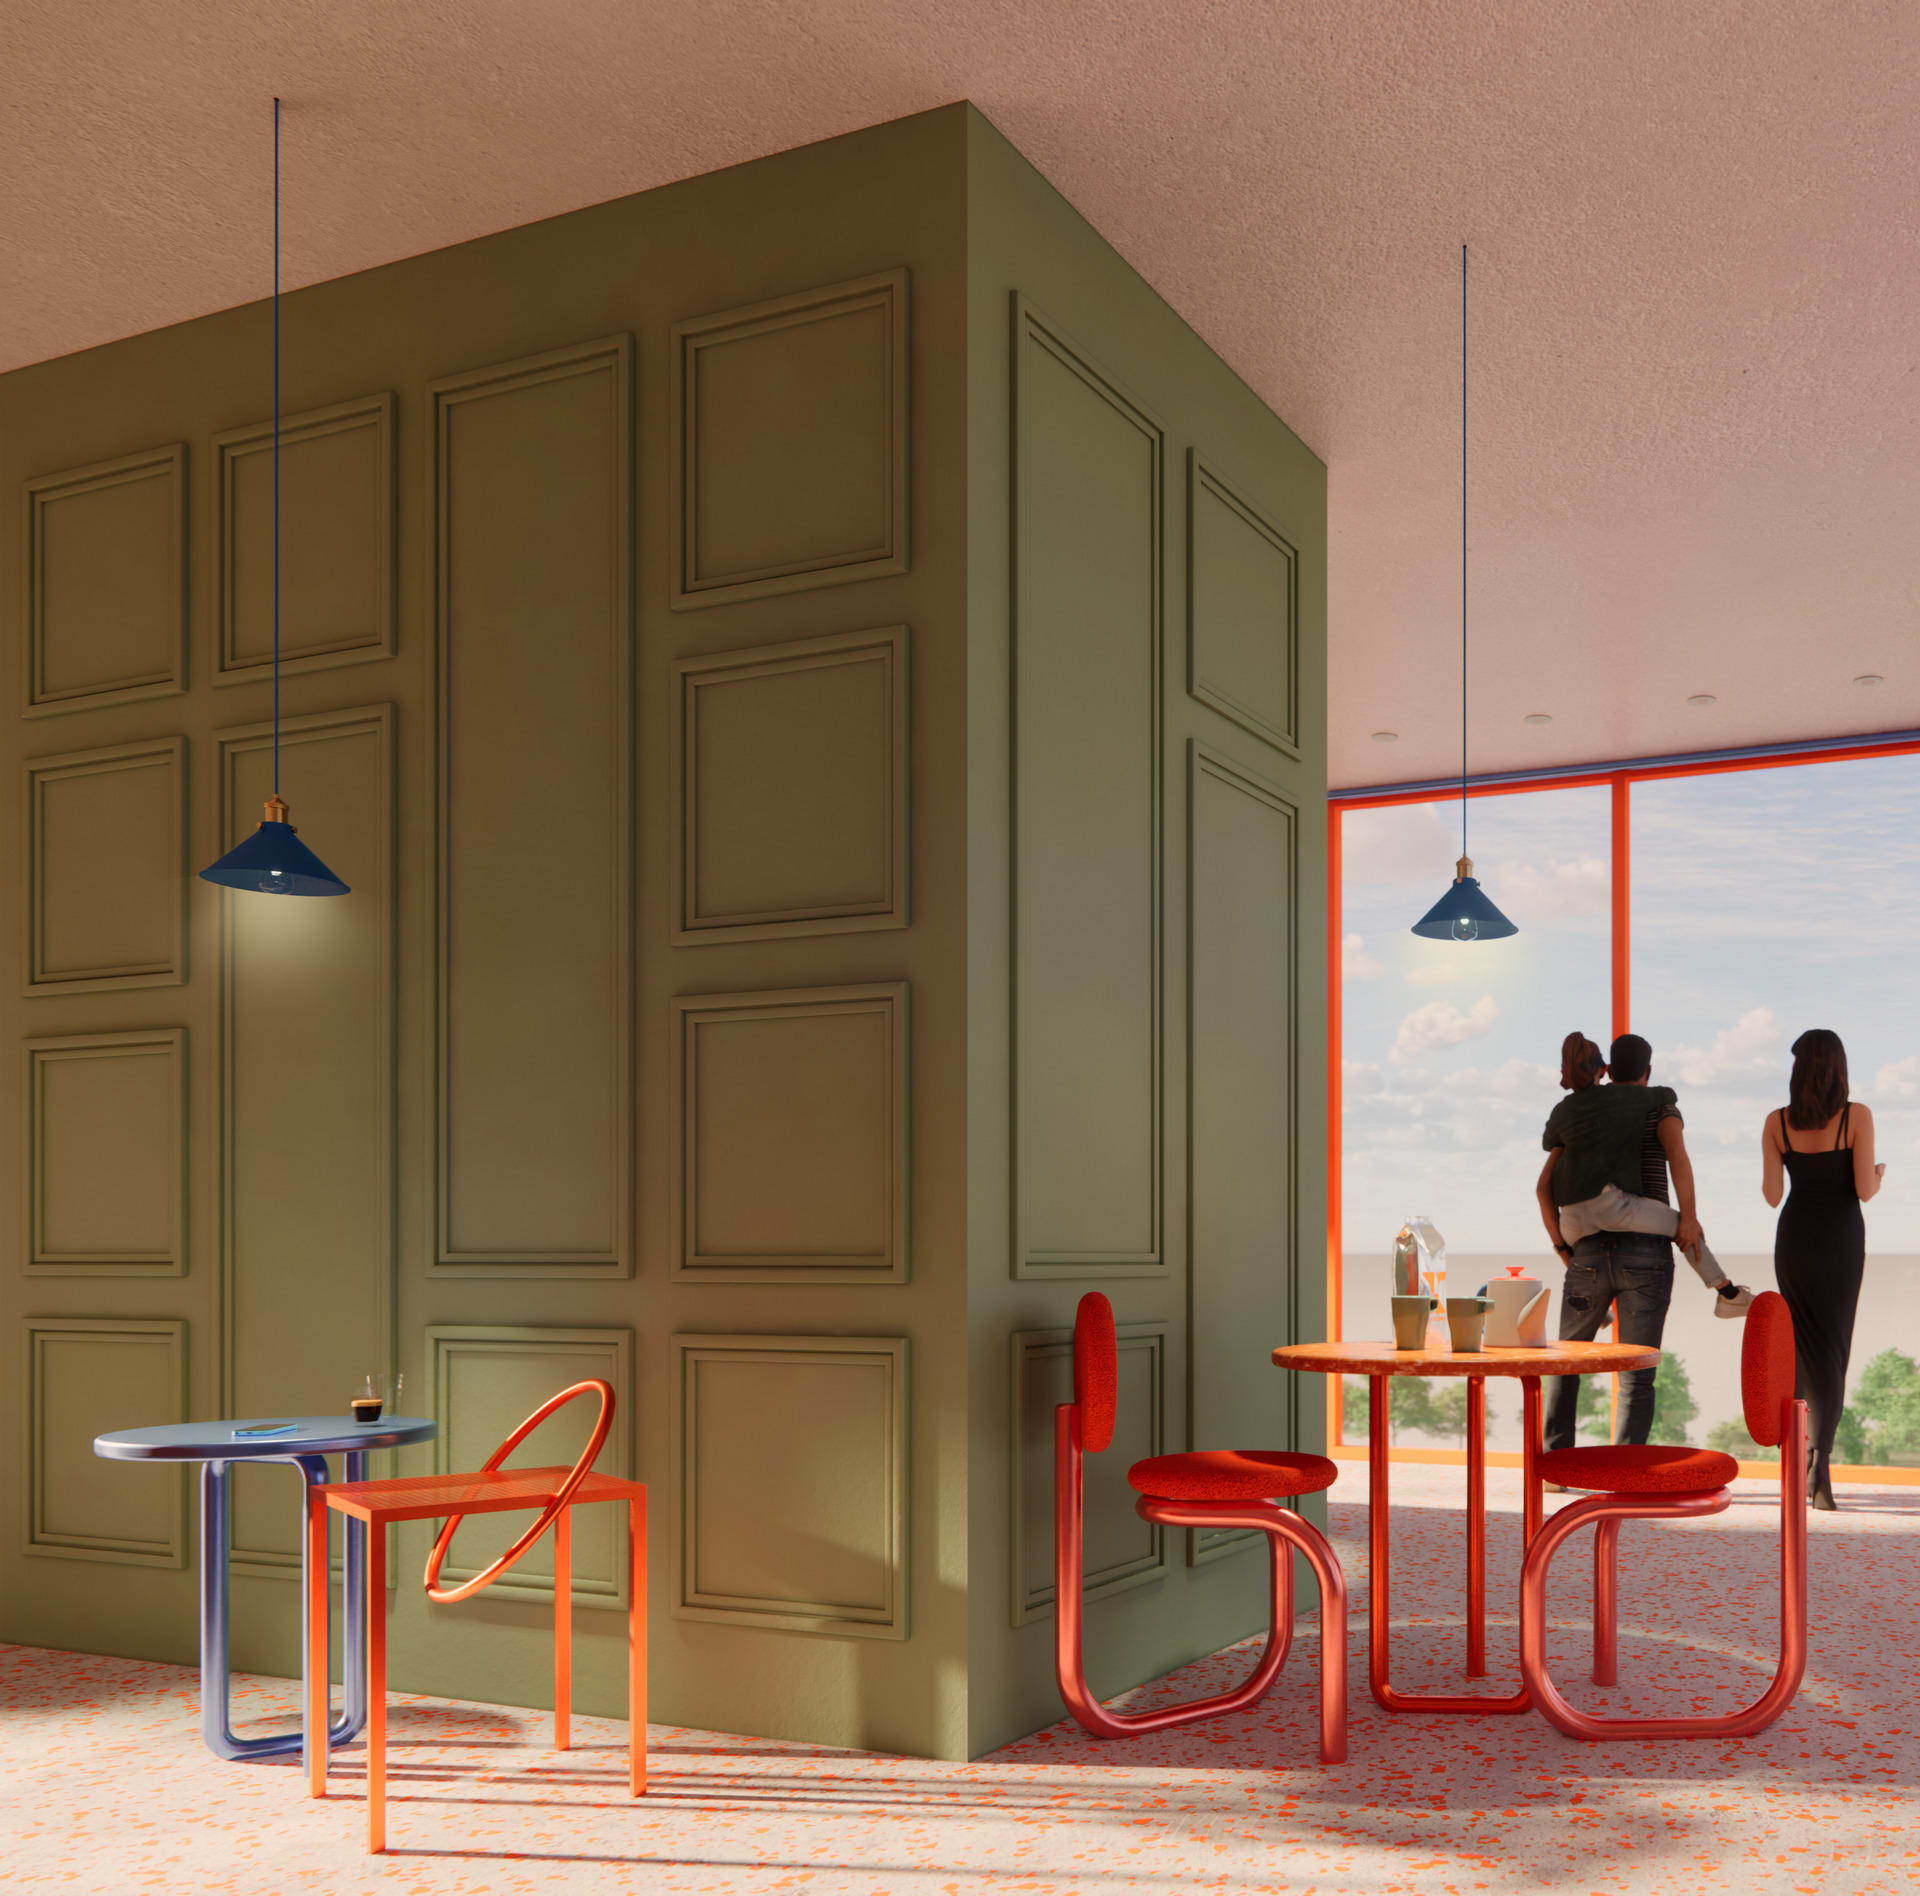 rendering showing the different seating areas of the cafe